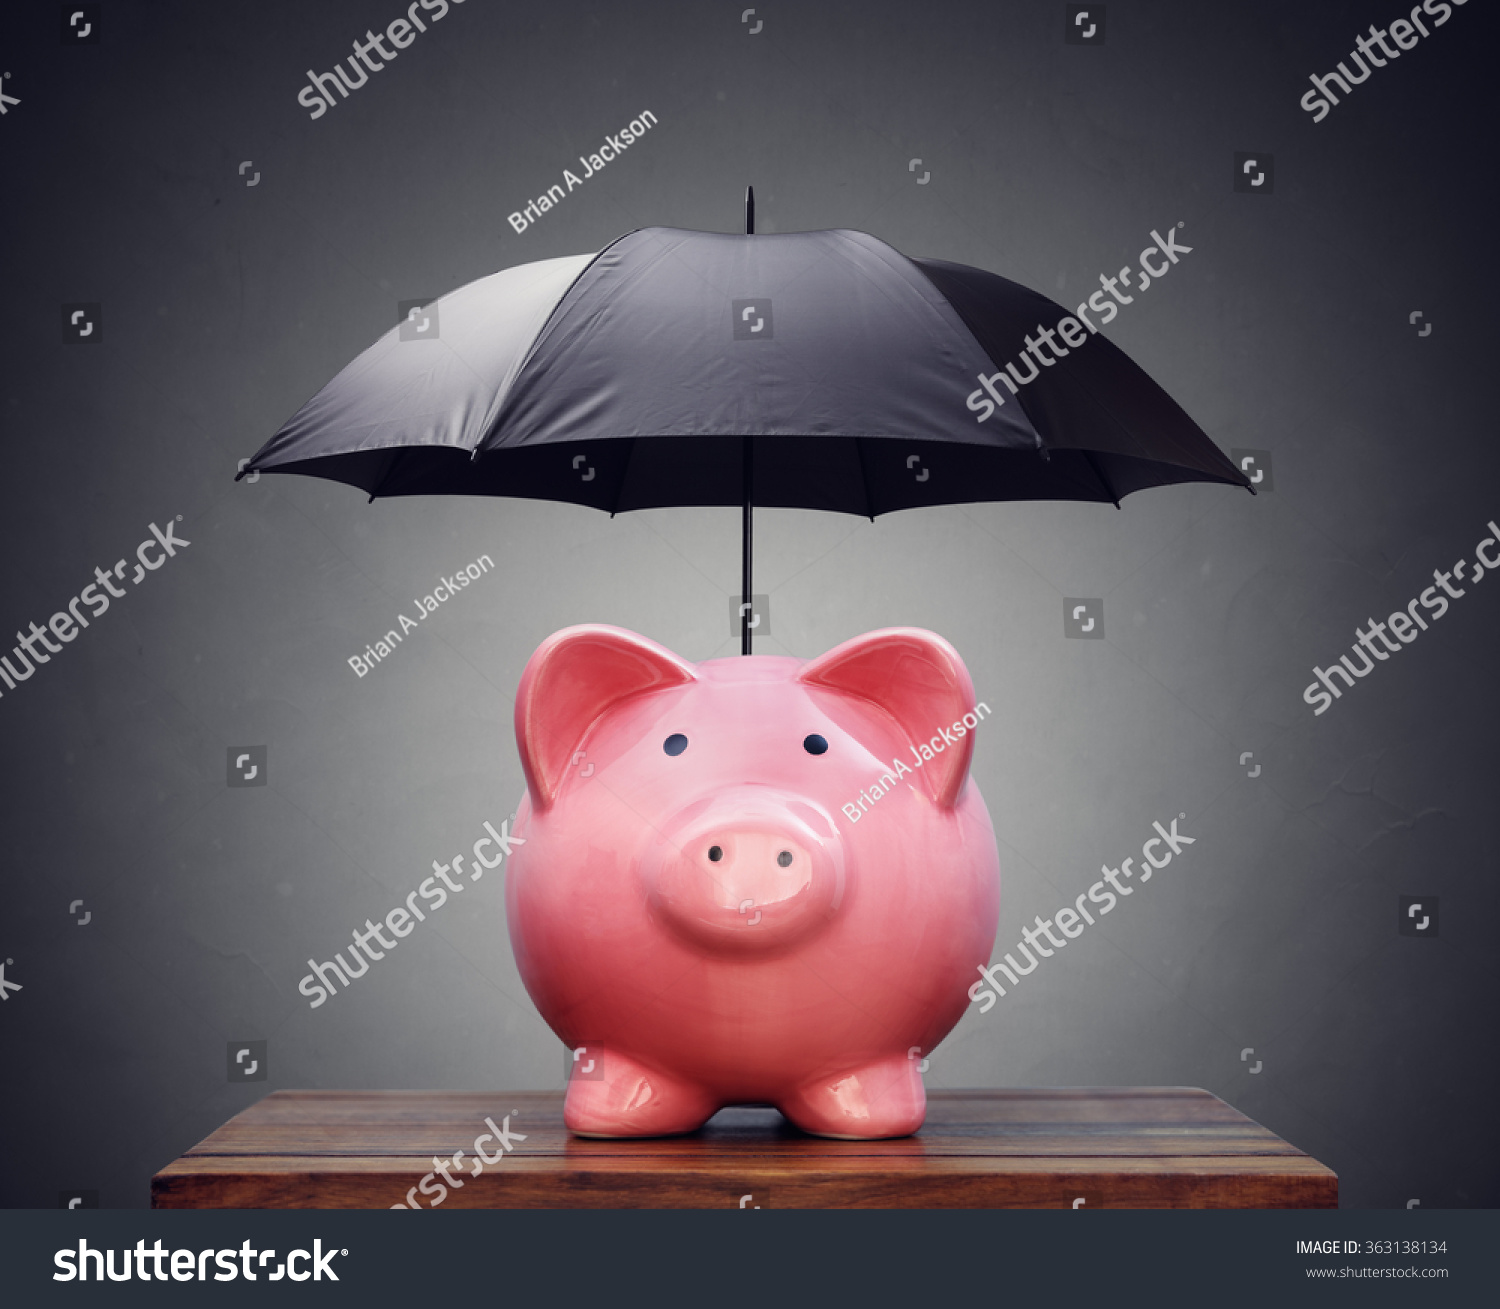 Piggy bank with umbrella concept for finance insurance, protection, safe investment or banking #363138134